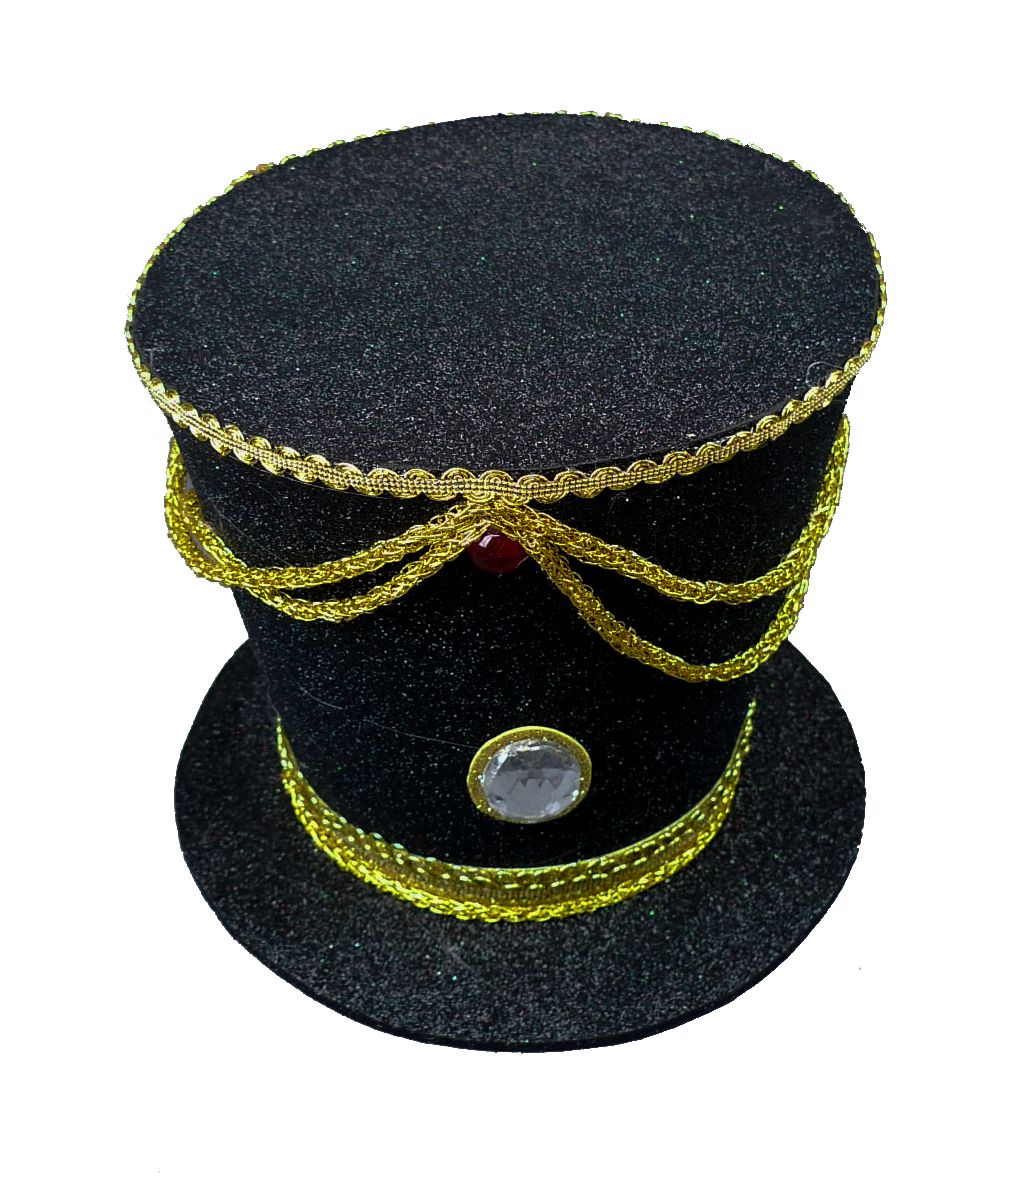 Black and Gold Nutcracker Soldier Hat 10 in X 9 in X 8.5 in - 84193BKGD